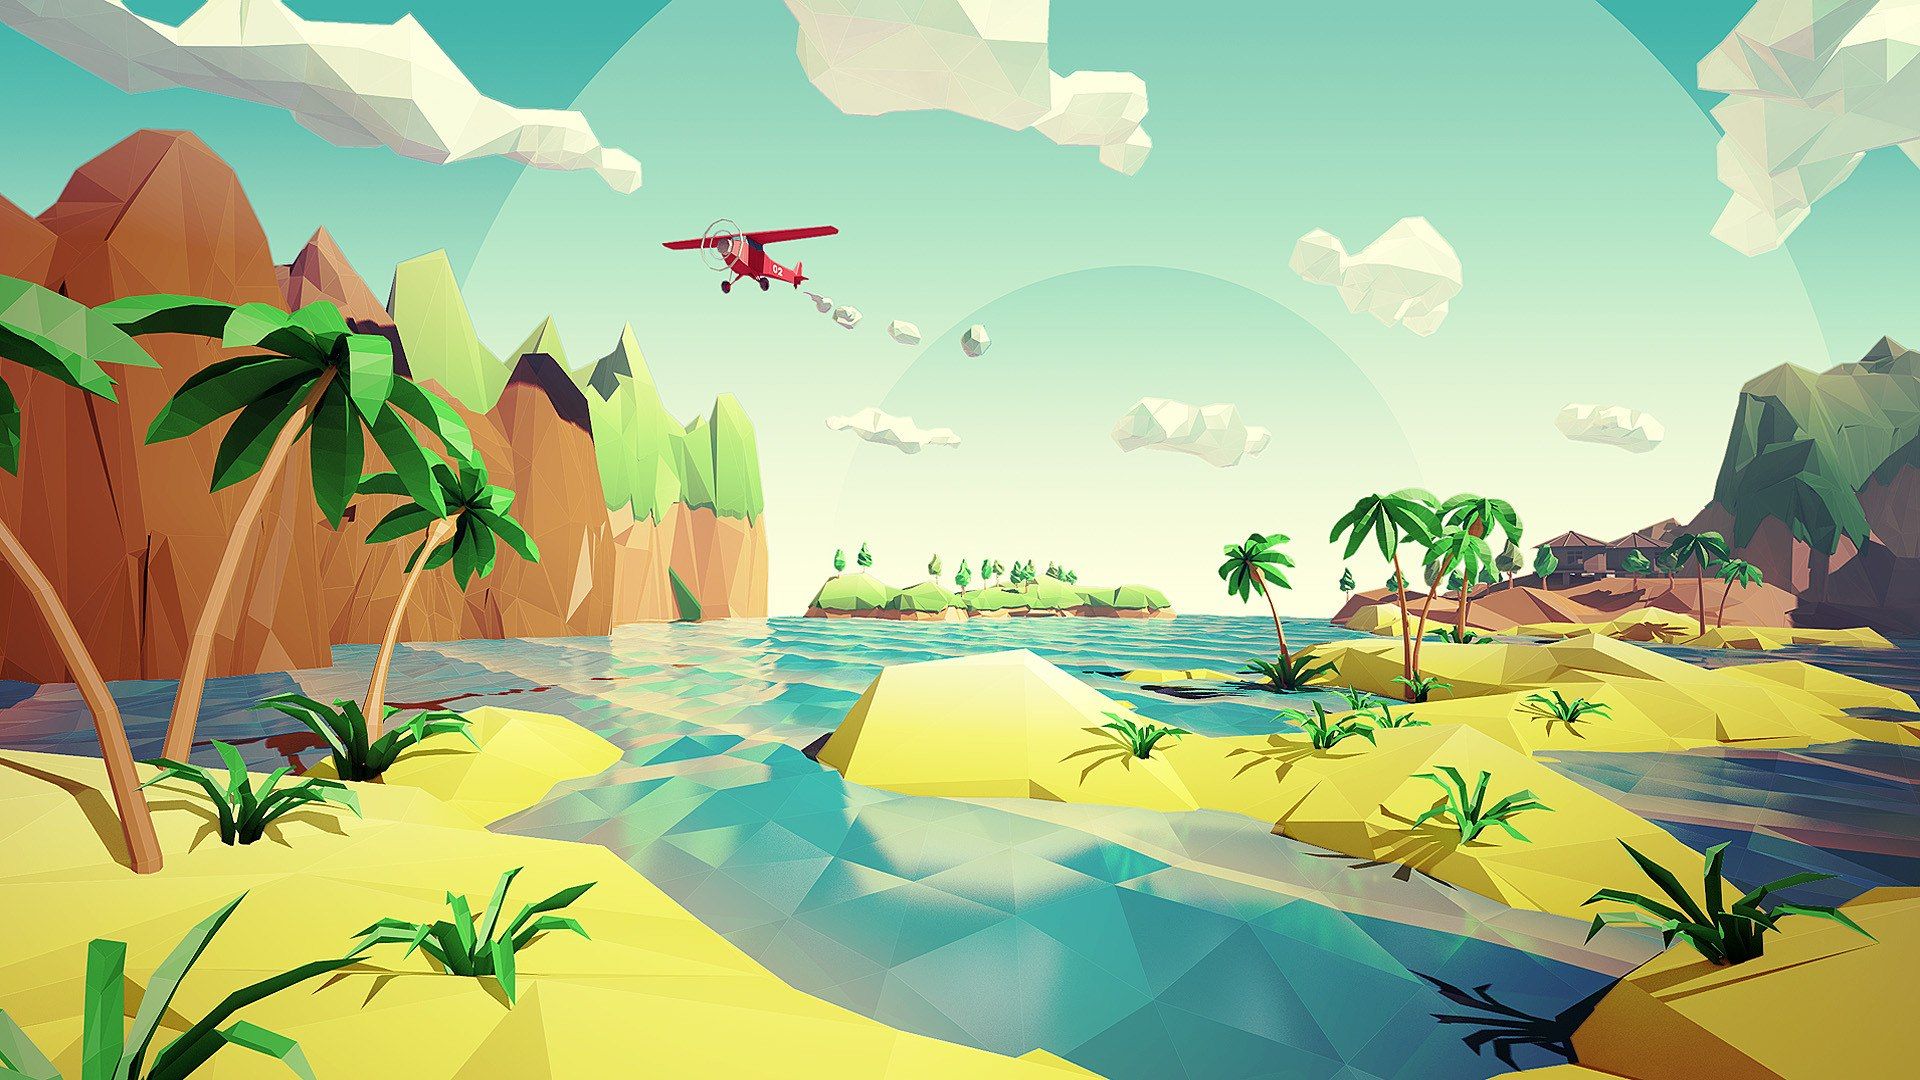 Low poly style wallpaper fulll pack HD (Part 1)